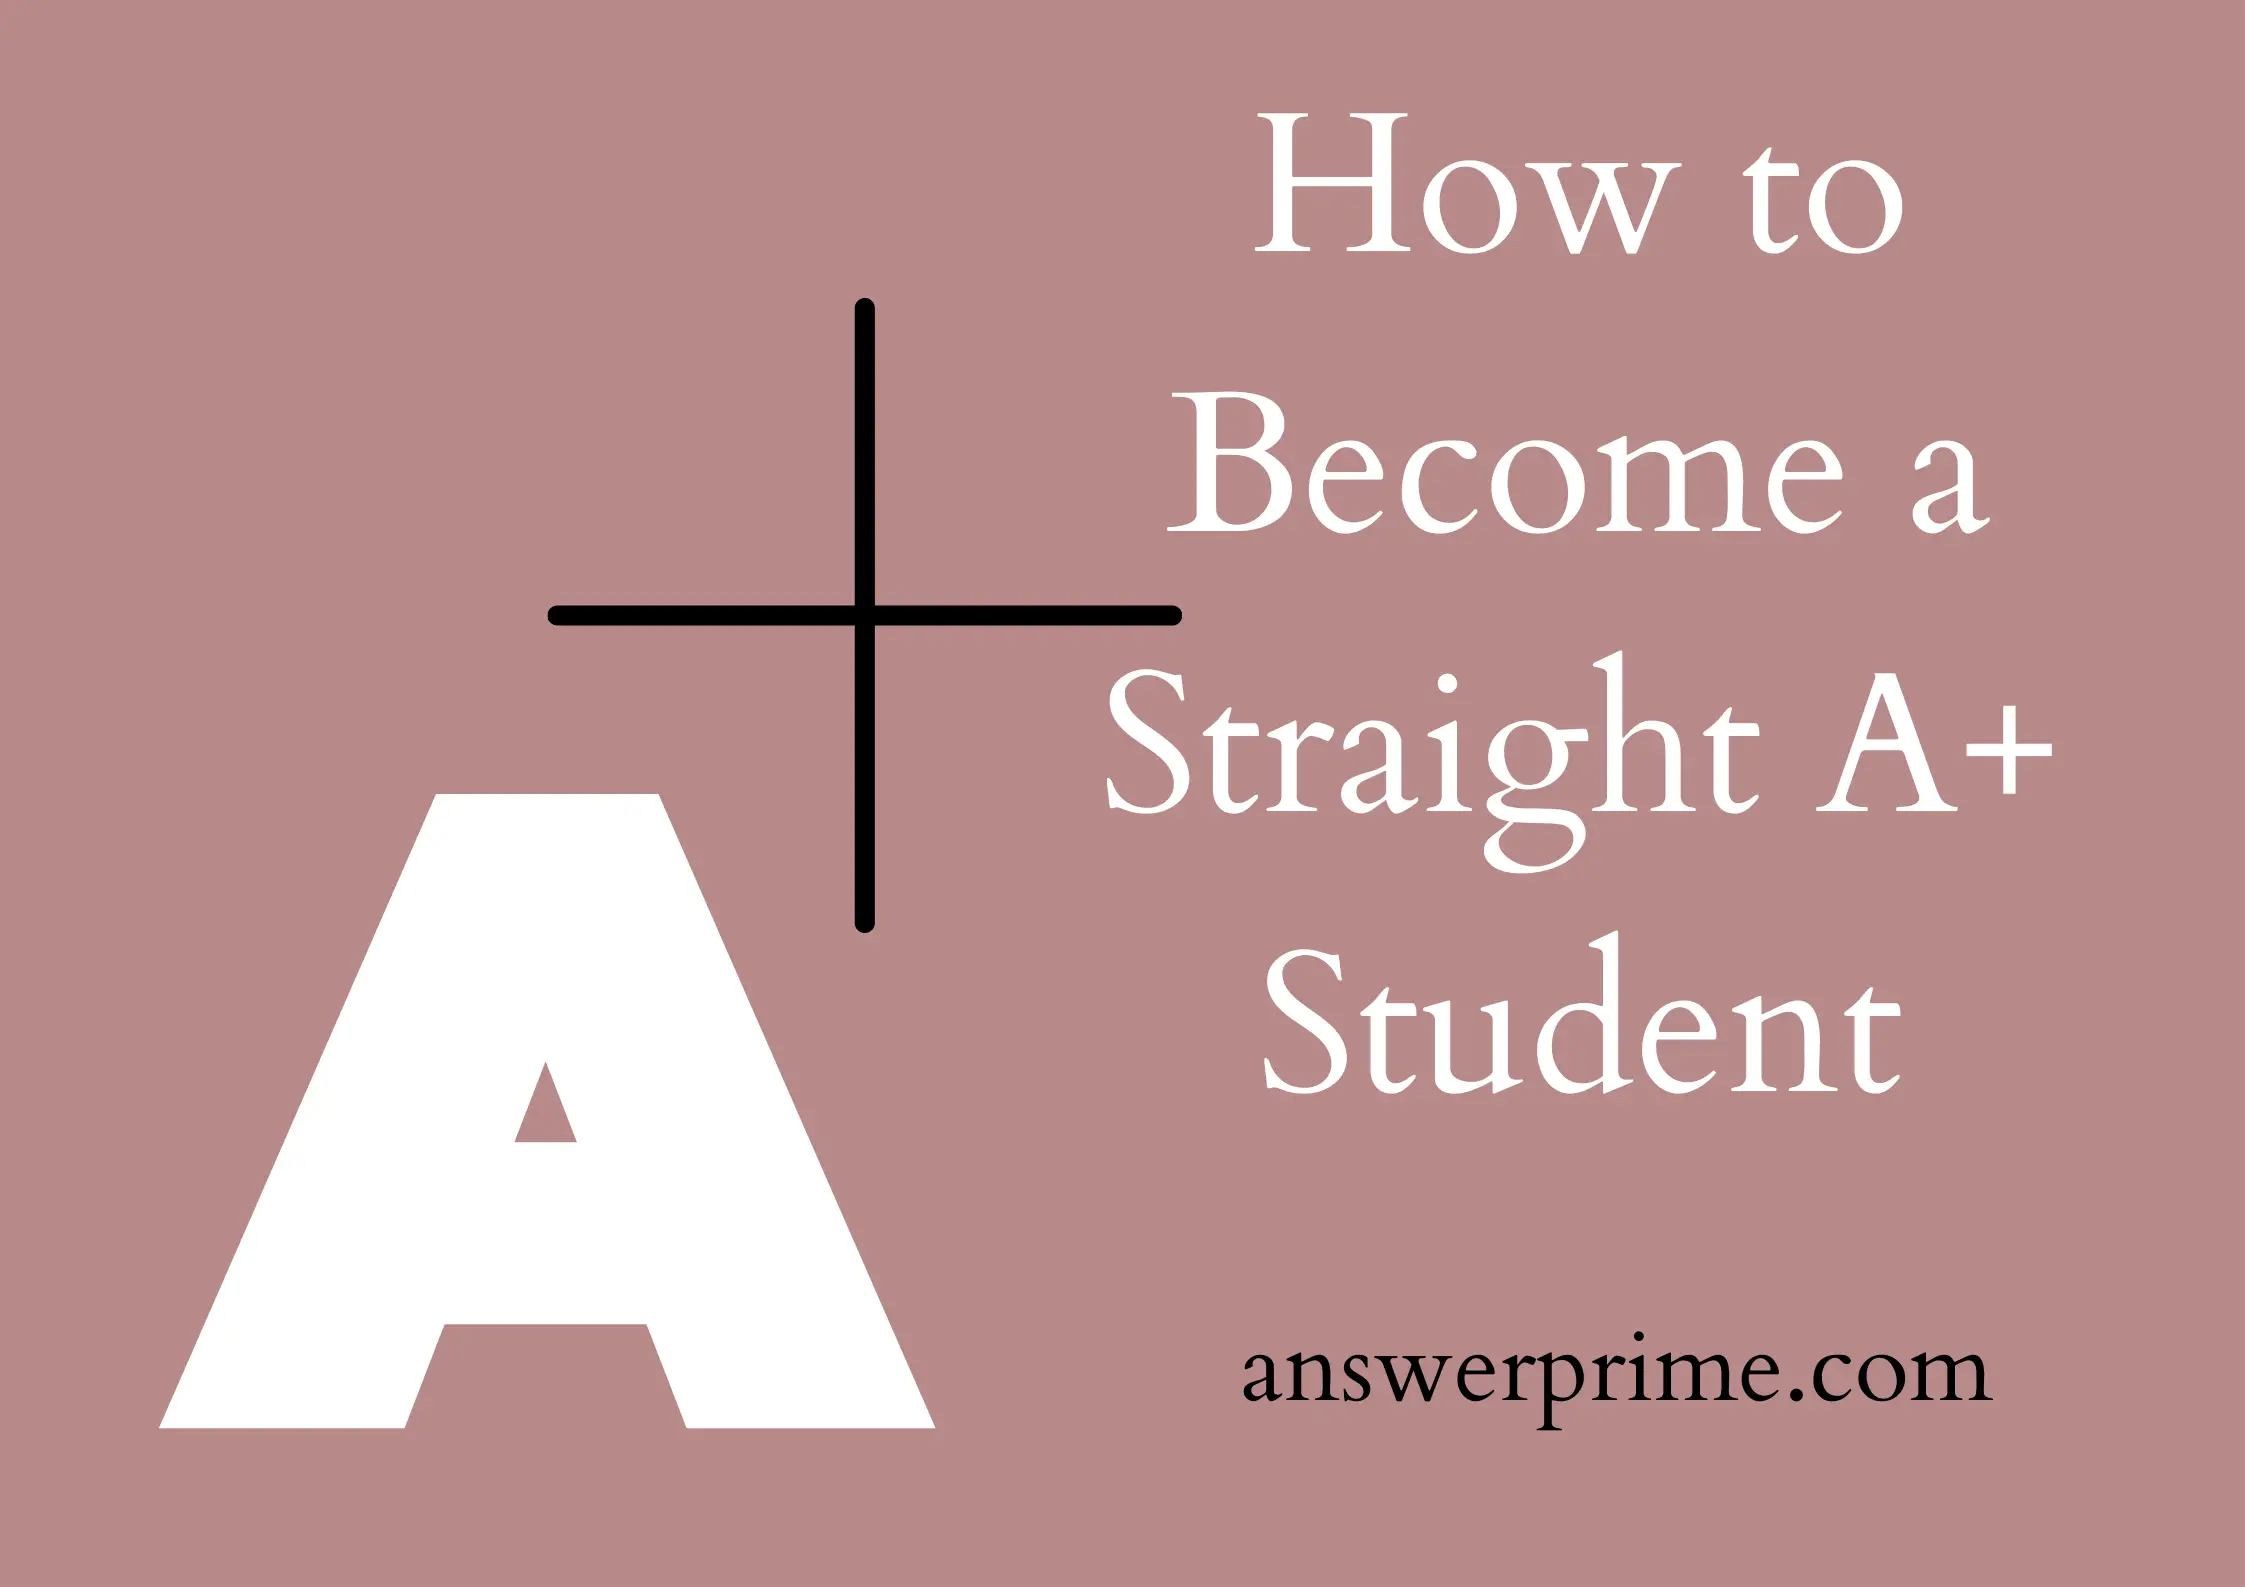 How to Become a Straight A+ Student